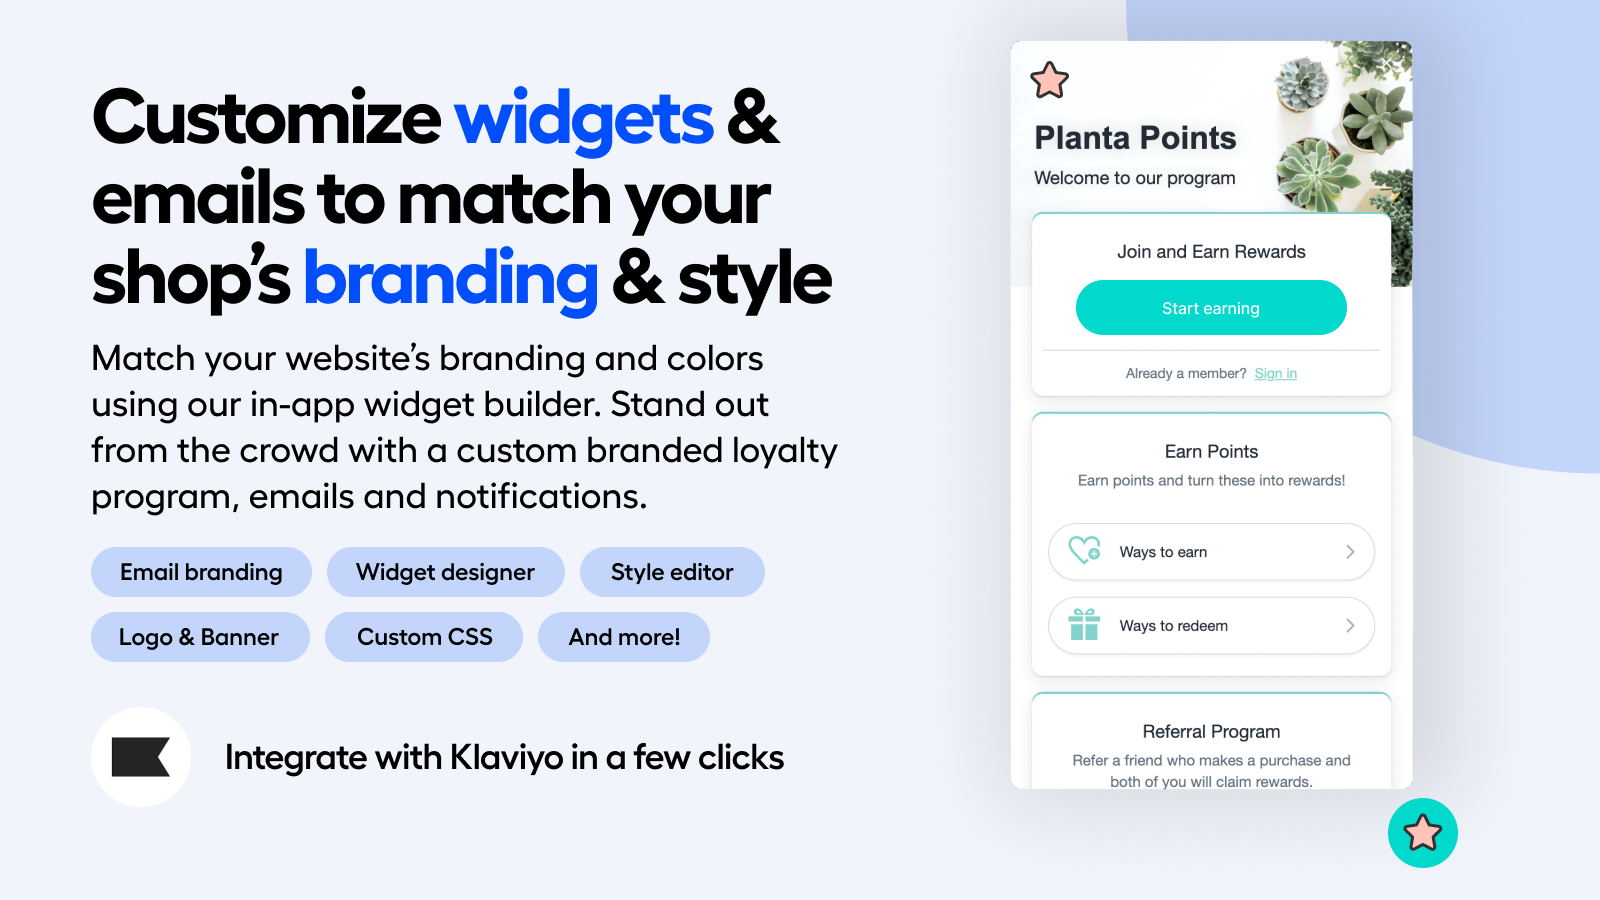 Customize widgets & emails to match your shop’s branding & style